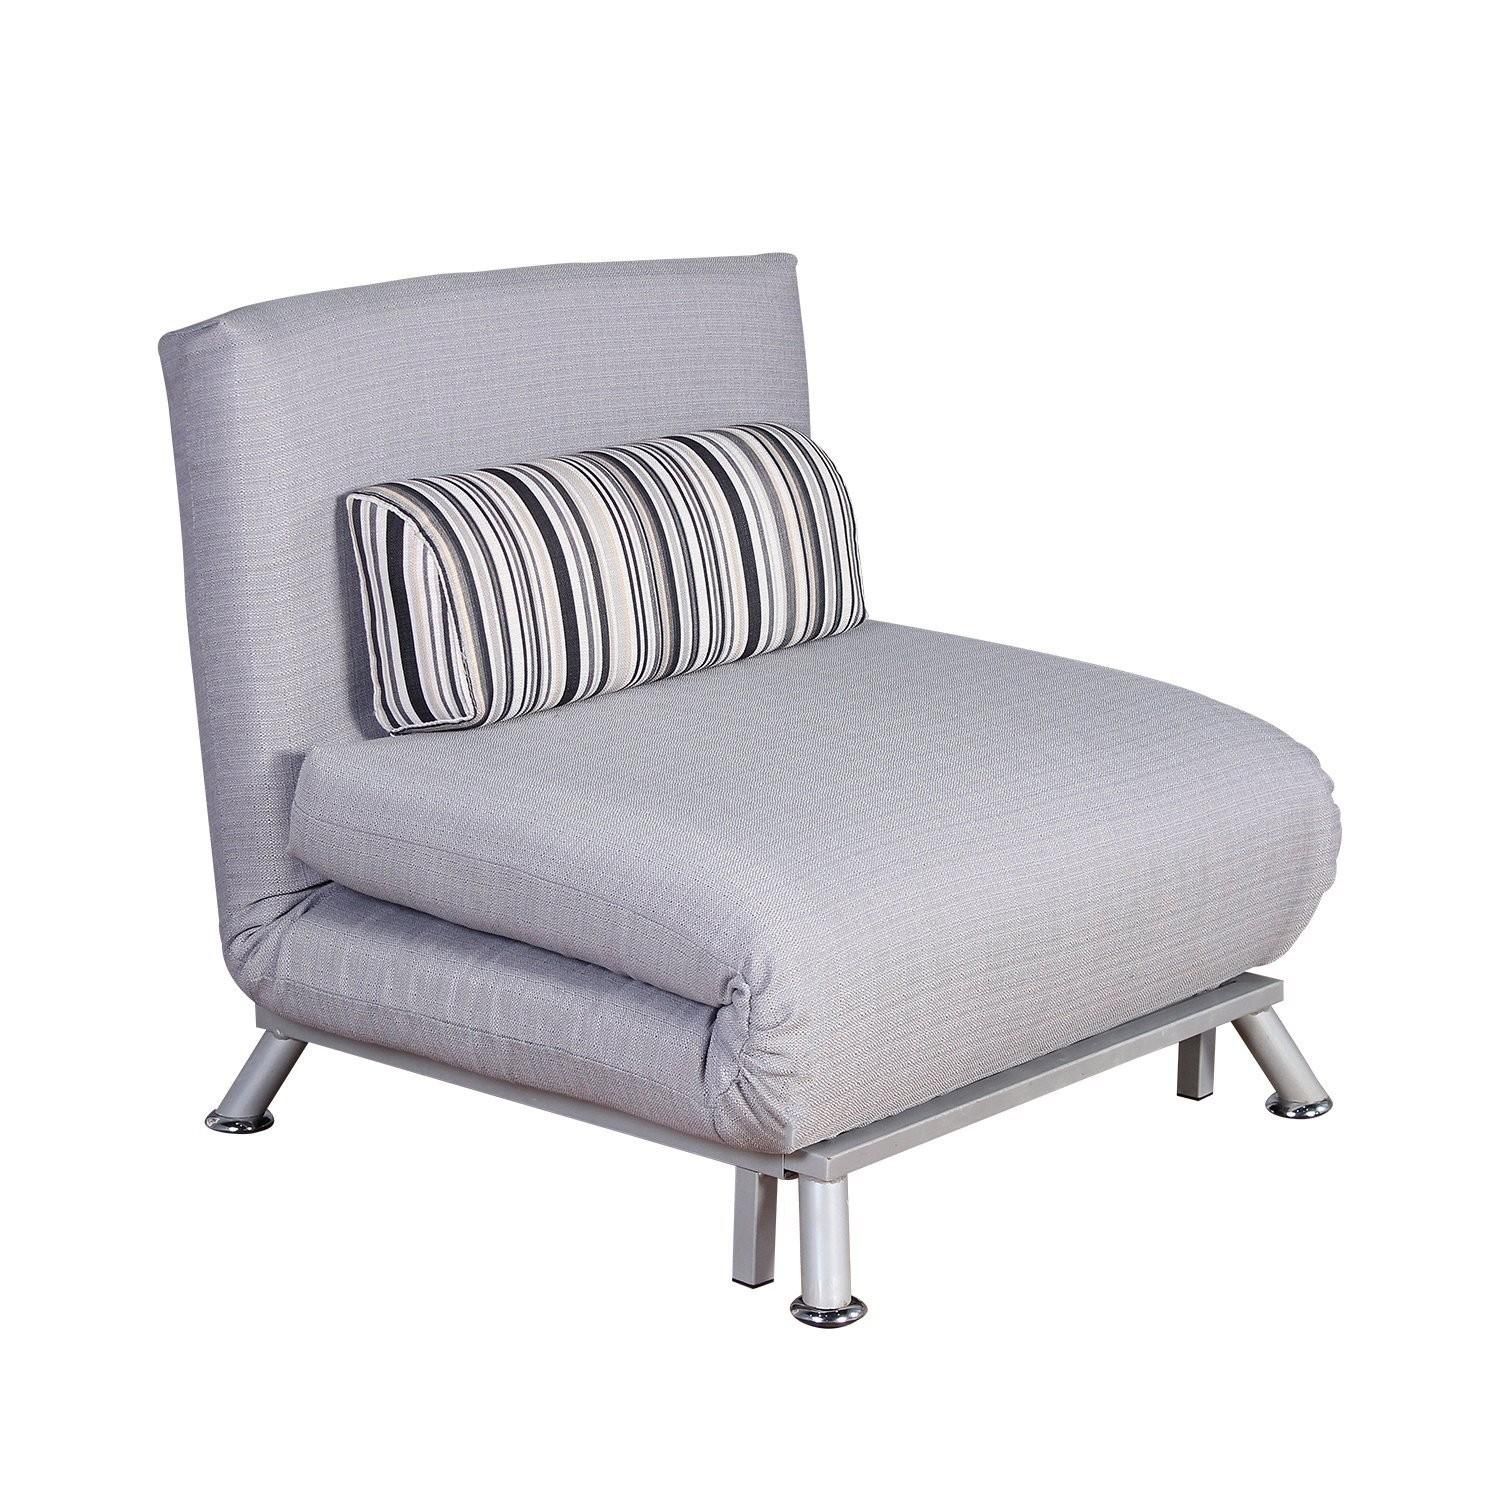 Single Sofa Chair Bed | Tehranmix Decoration With Regard To Single Chair Sofa Bed (View 12 of 20)